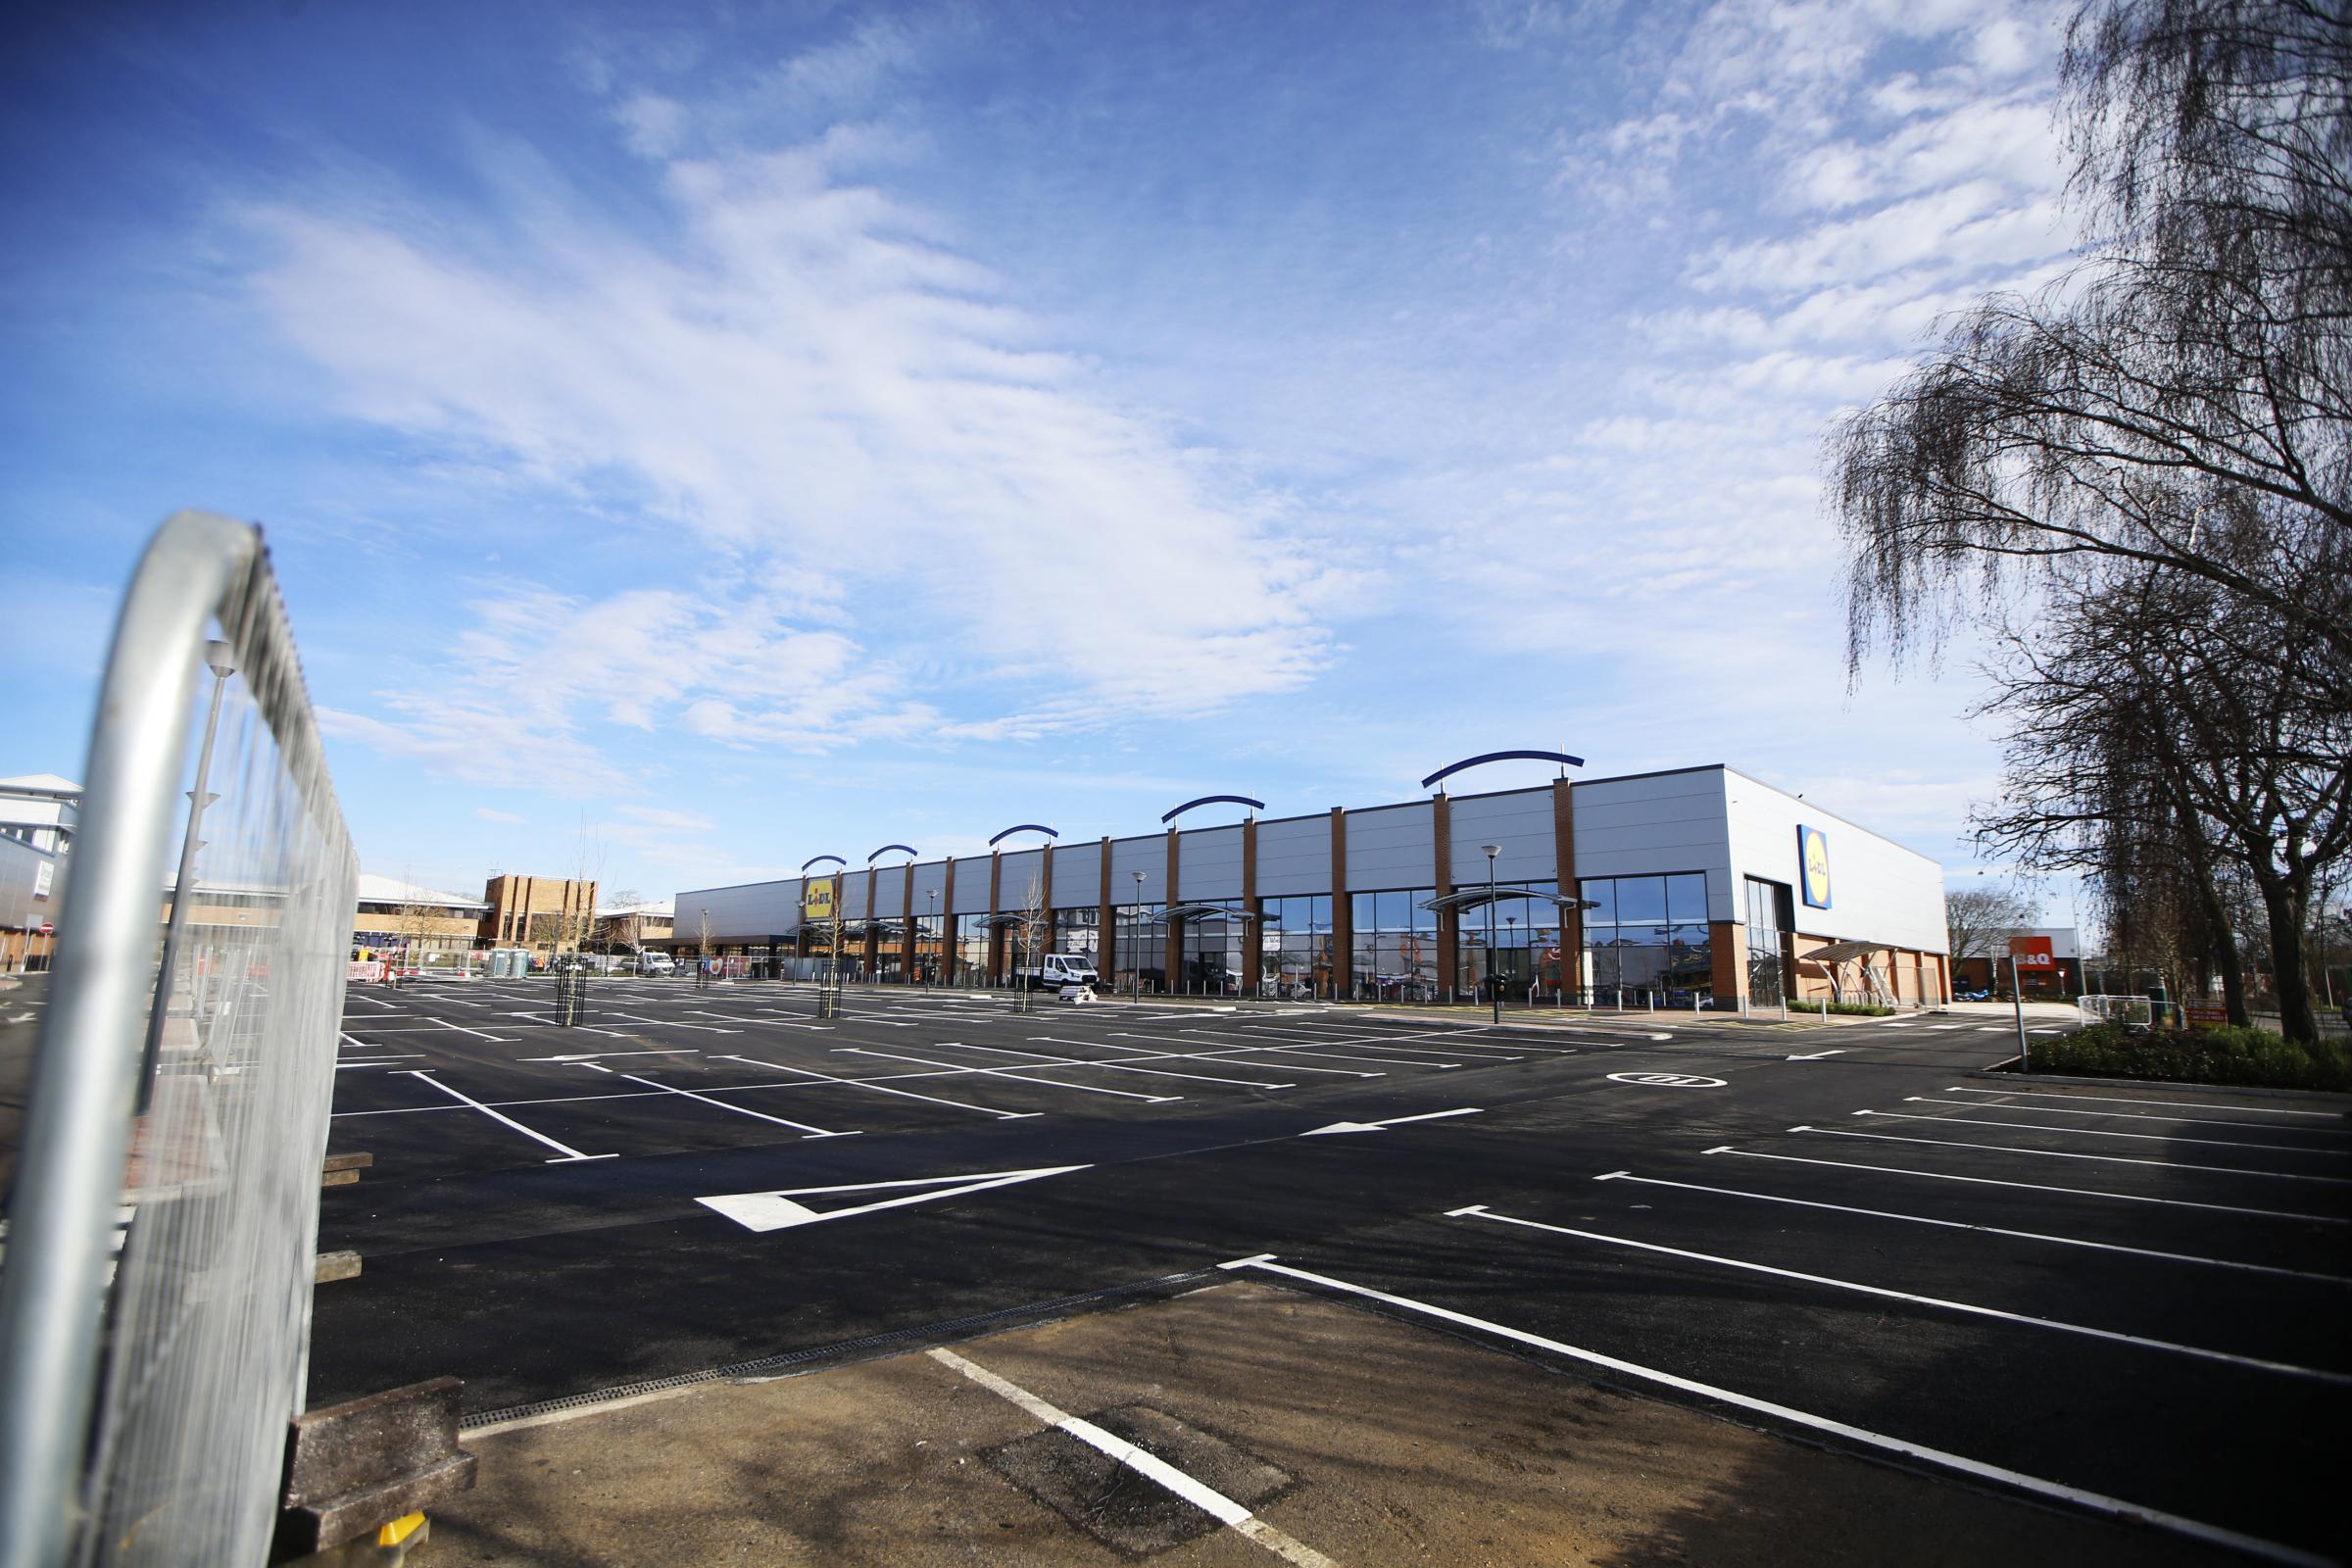 New units at the Fairacres Retail Park in Abingdon are nearing completion. 23/02/2021 Picture by Ed Nix